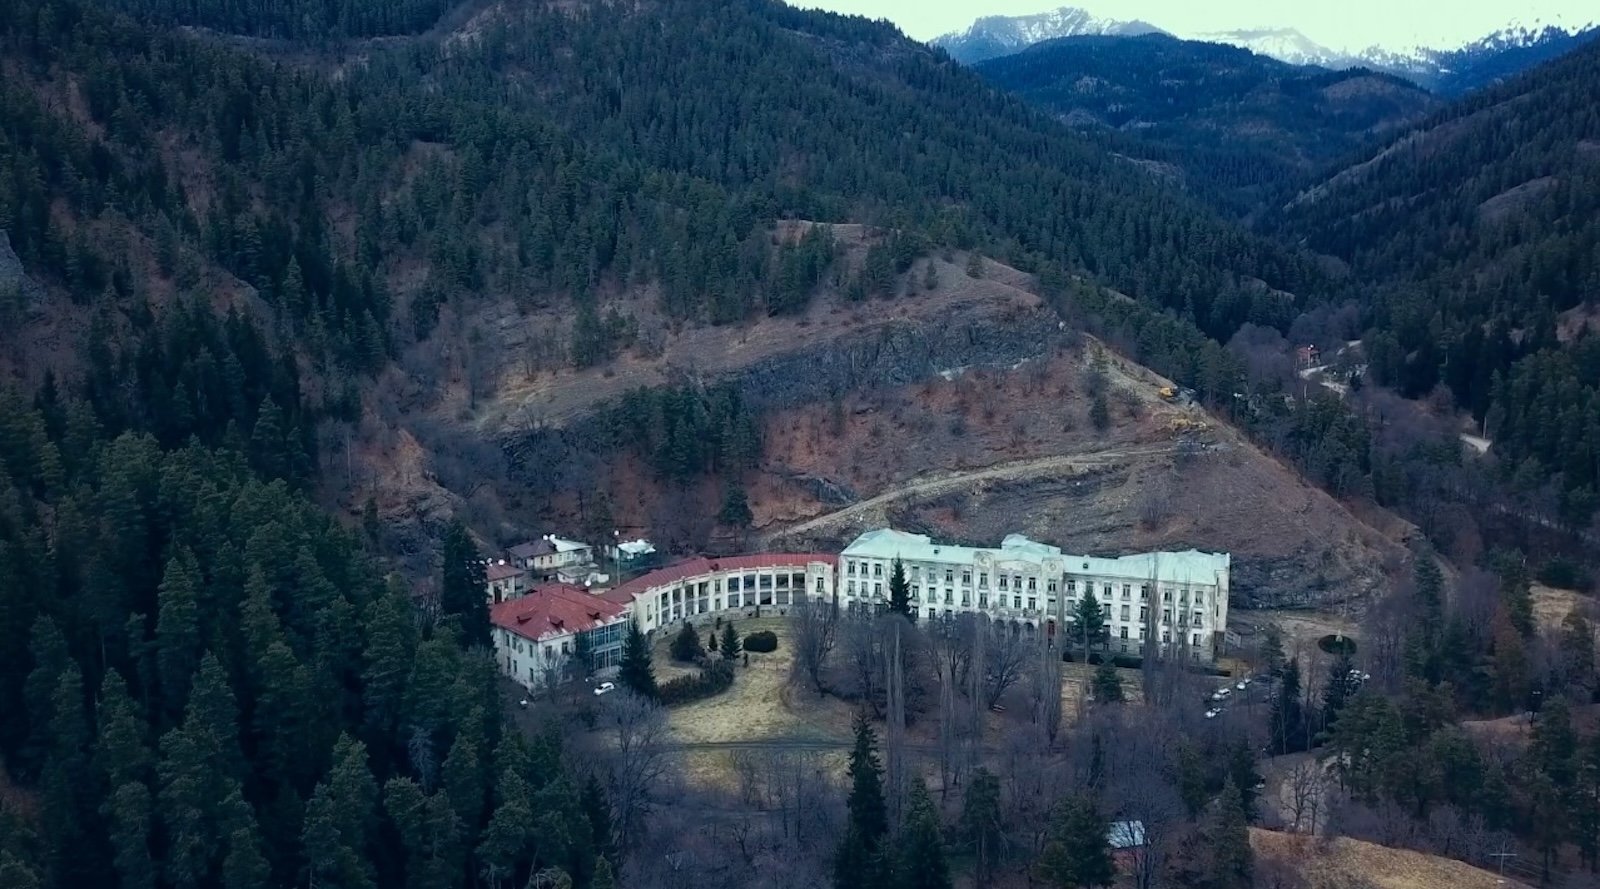 A vast building nestled deep in a mountainous environment, seen from a distance